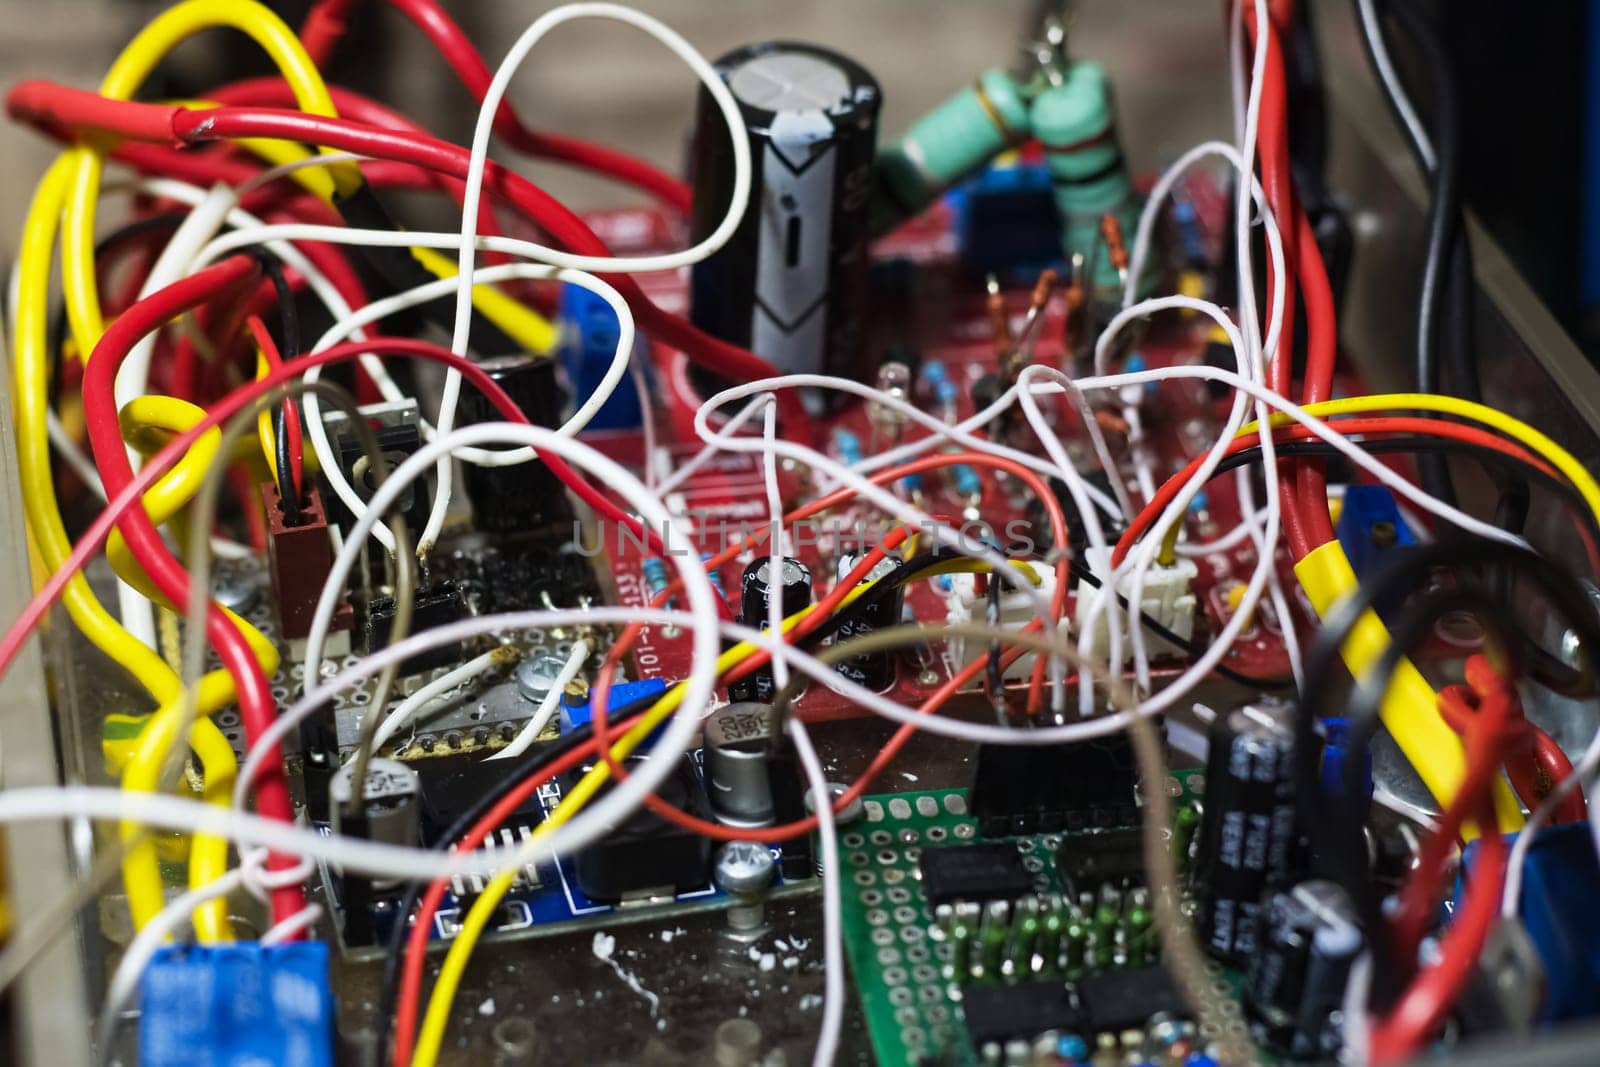 Boards and many colored wires in an electronic device close up